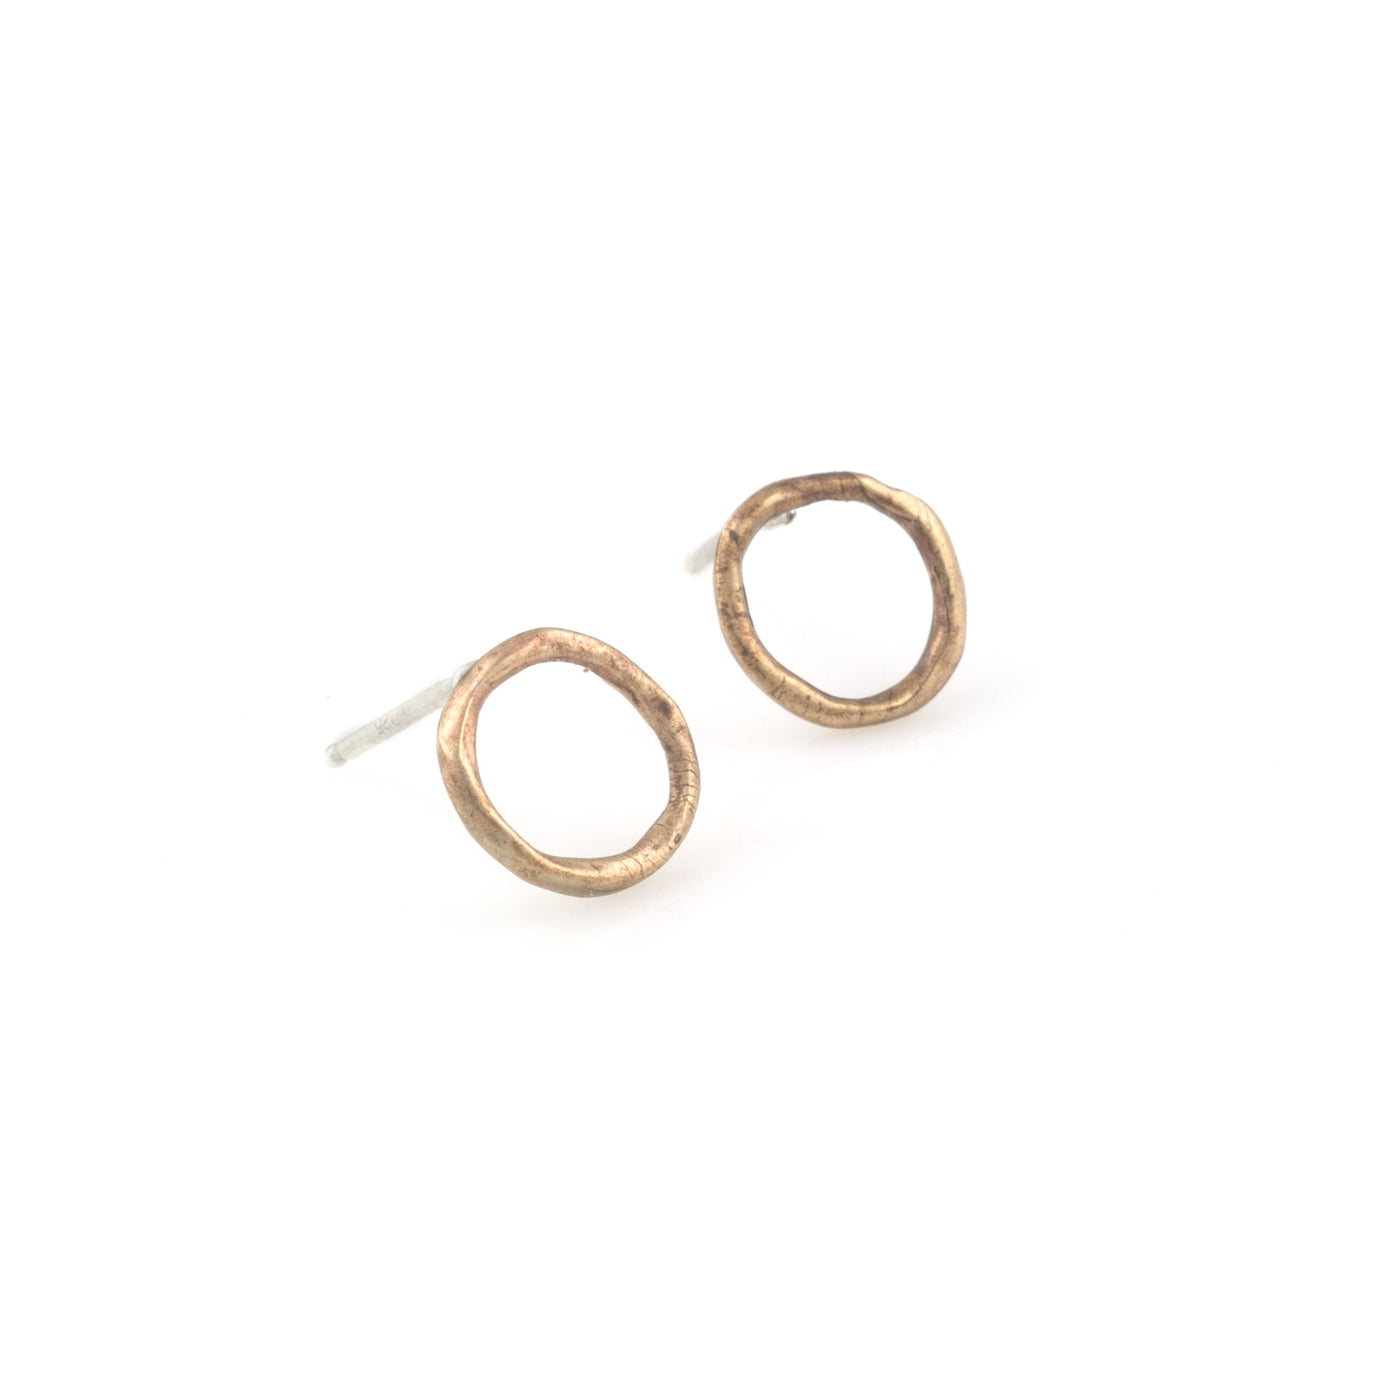 Stud-Earrings-Made-in-Amercia-Circle-Silver-Bronze-Small